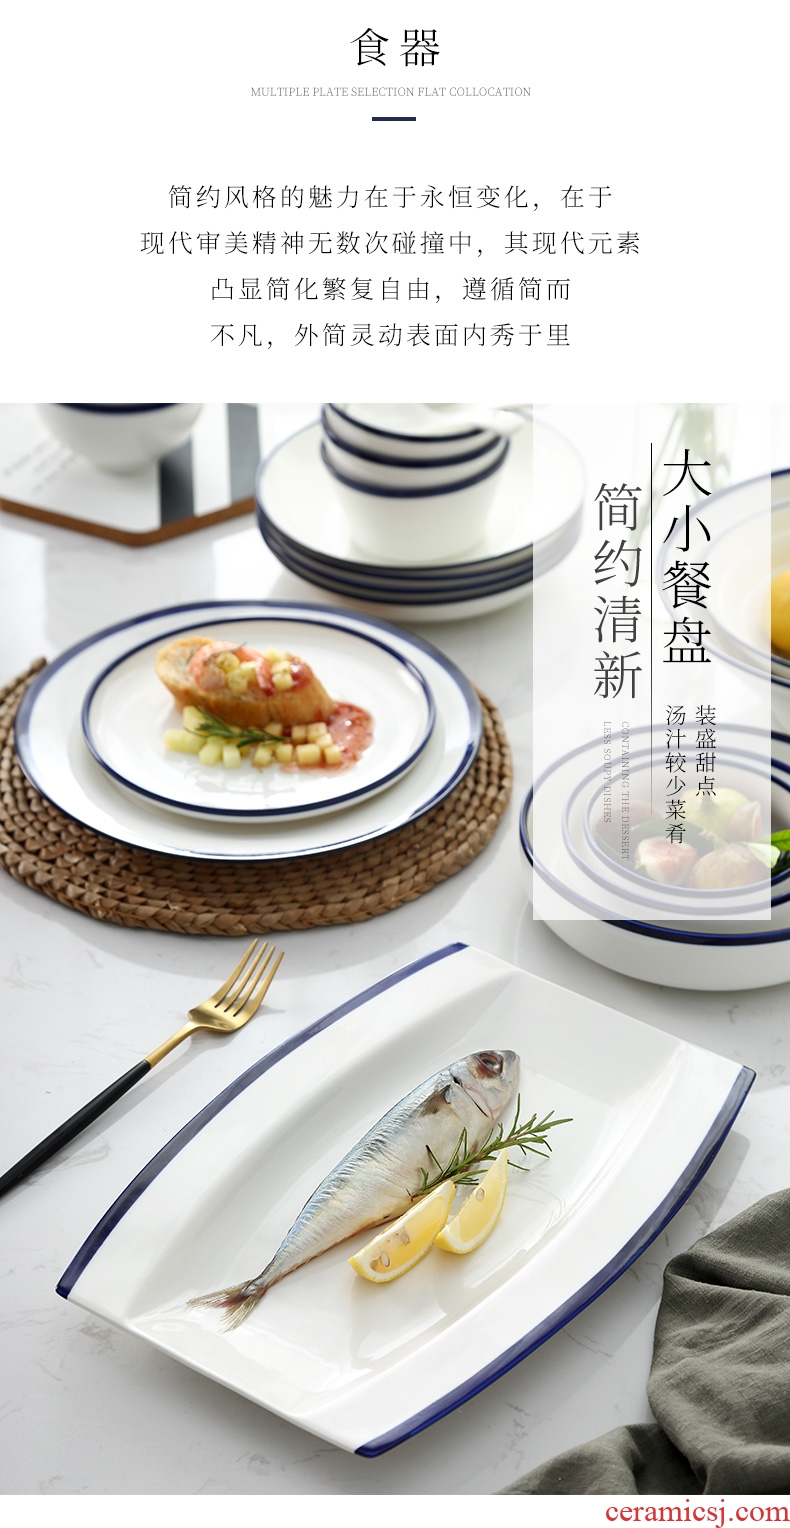 Jingdezhen ceramic home plate creative contracted round food dishes dumplings plate under the glaze color of Chinese style restoring ancient ways of tableware